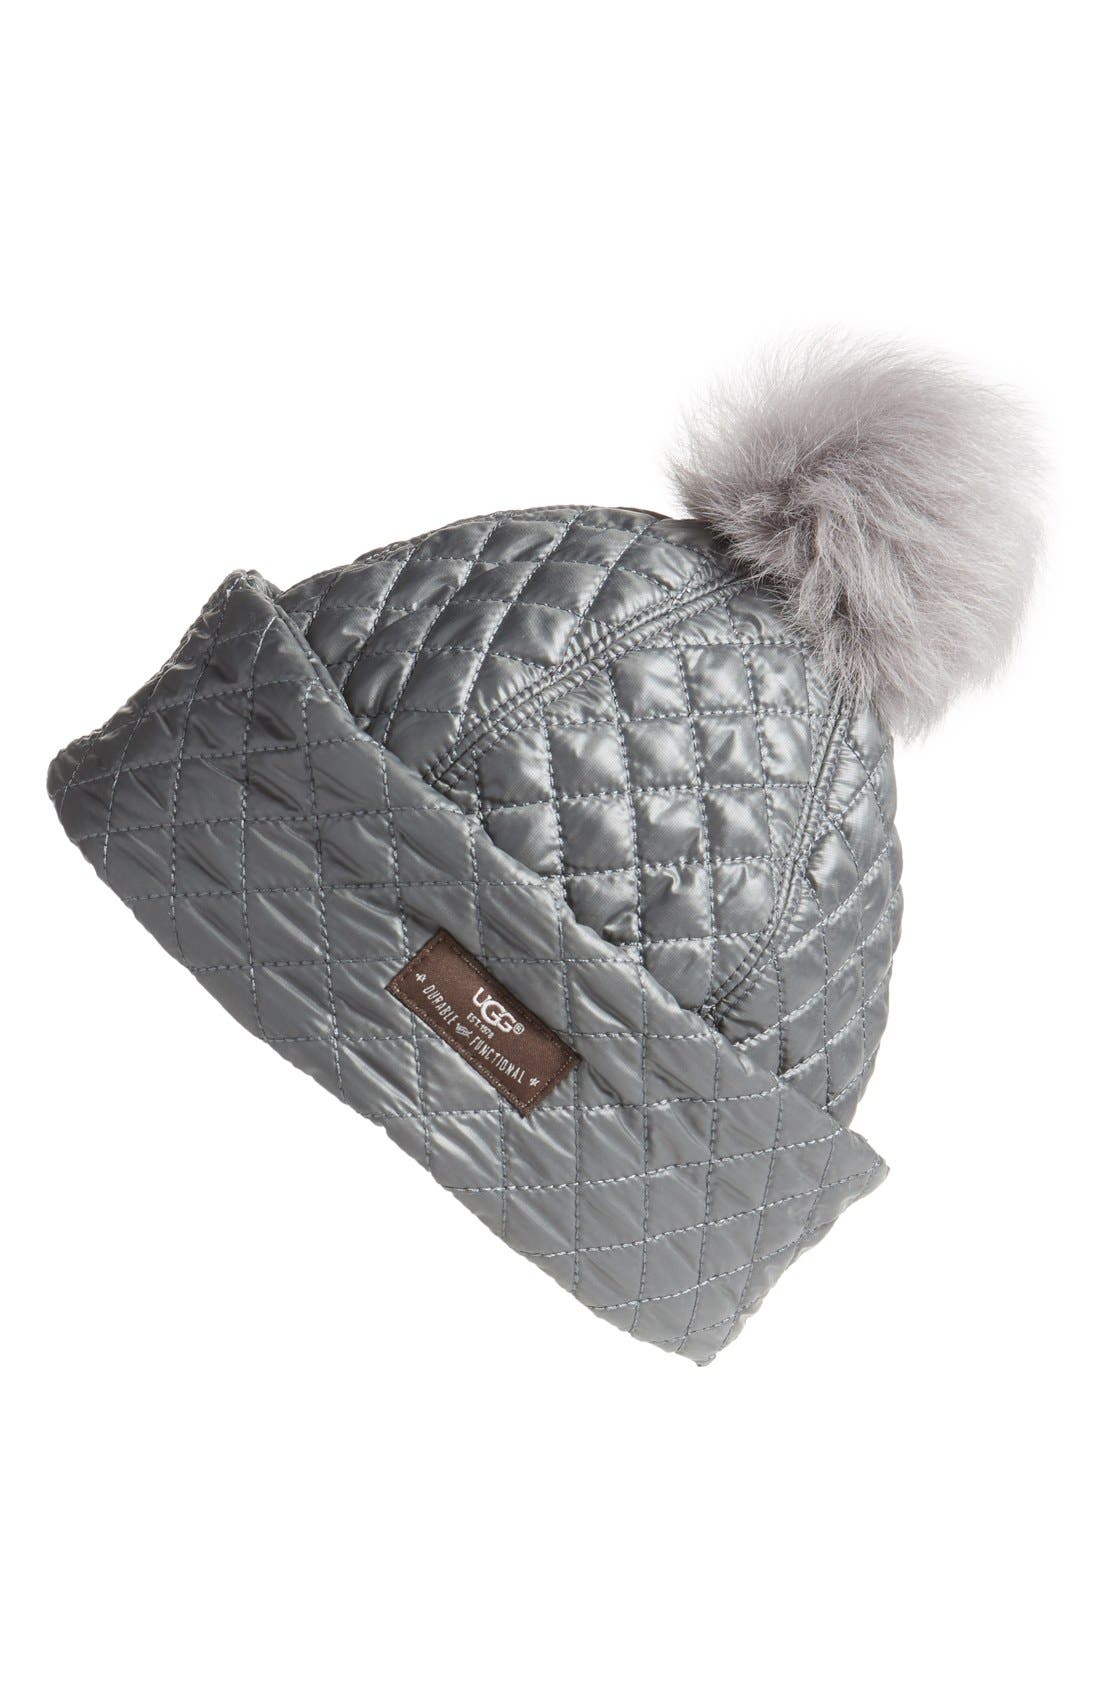 Ugg Australia Water Resistant Quilted Hat With Genuine Shearling Pompom